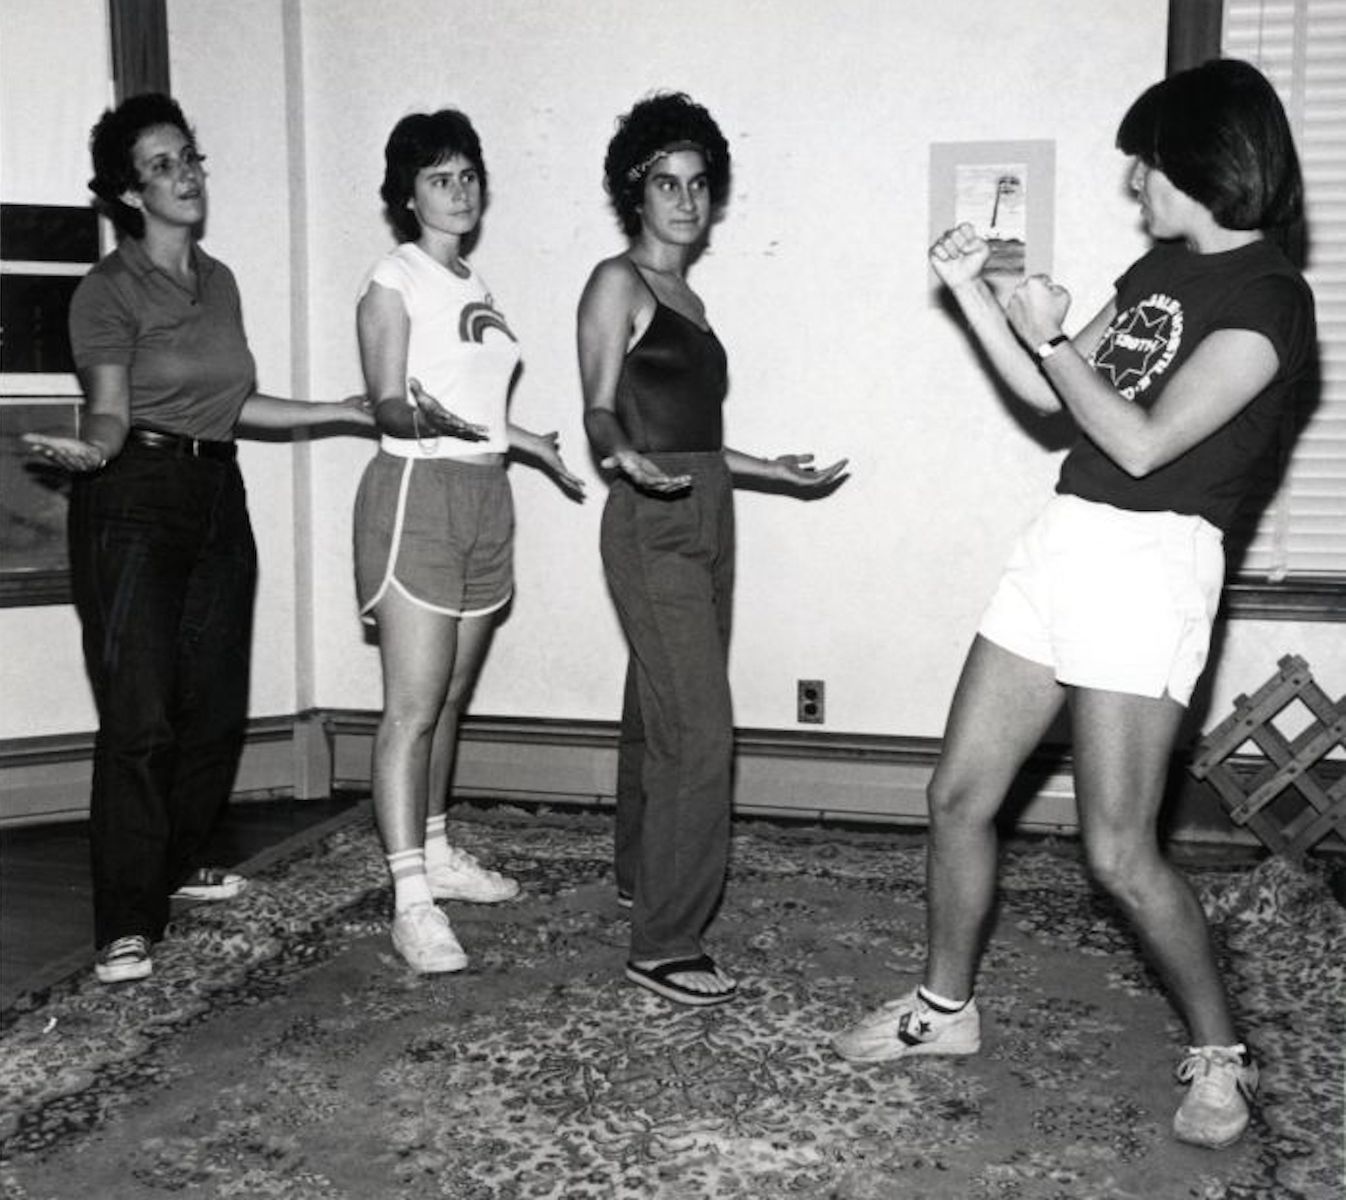 Mood Swings, a lesbian improv group about women in recovery from addiction. L-R: Alice Levine, Karen Kirby, Cheryl Qamar, and Liz Hjeltness (Cheryl’s lover at the time). Photo courtesy of Cheryl Qamar.